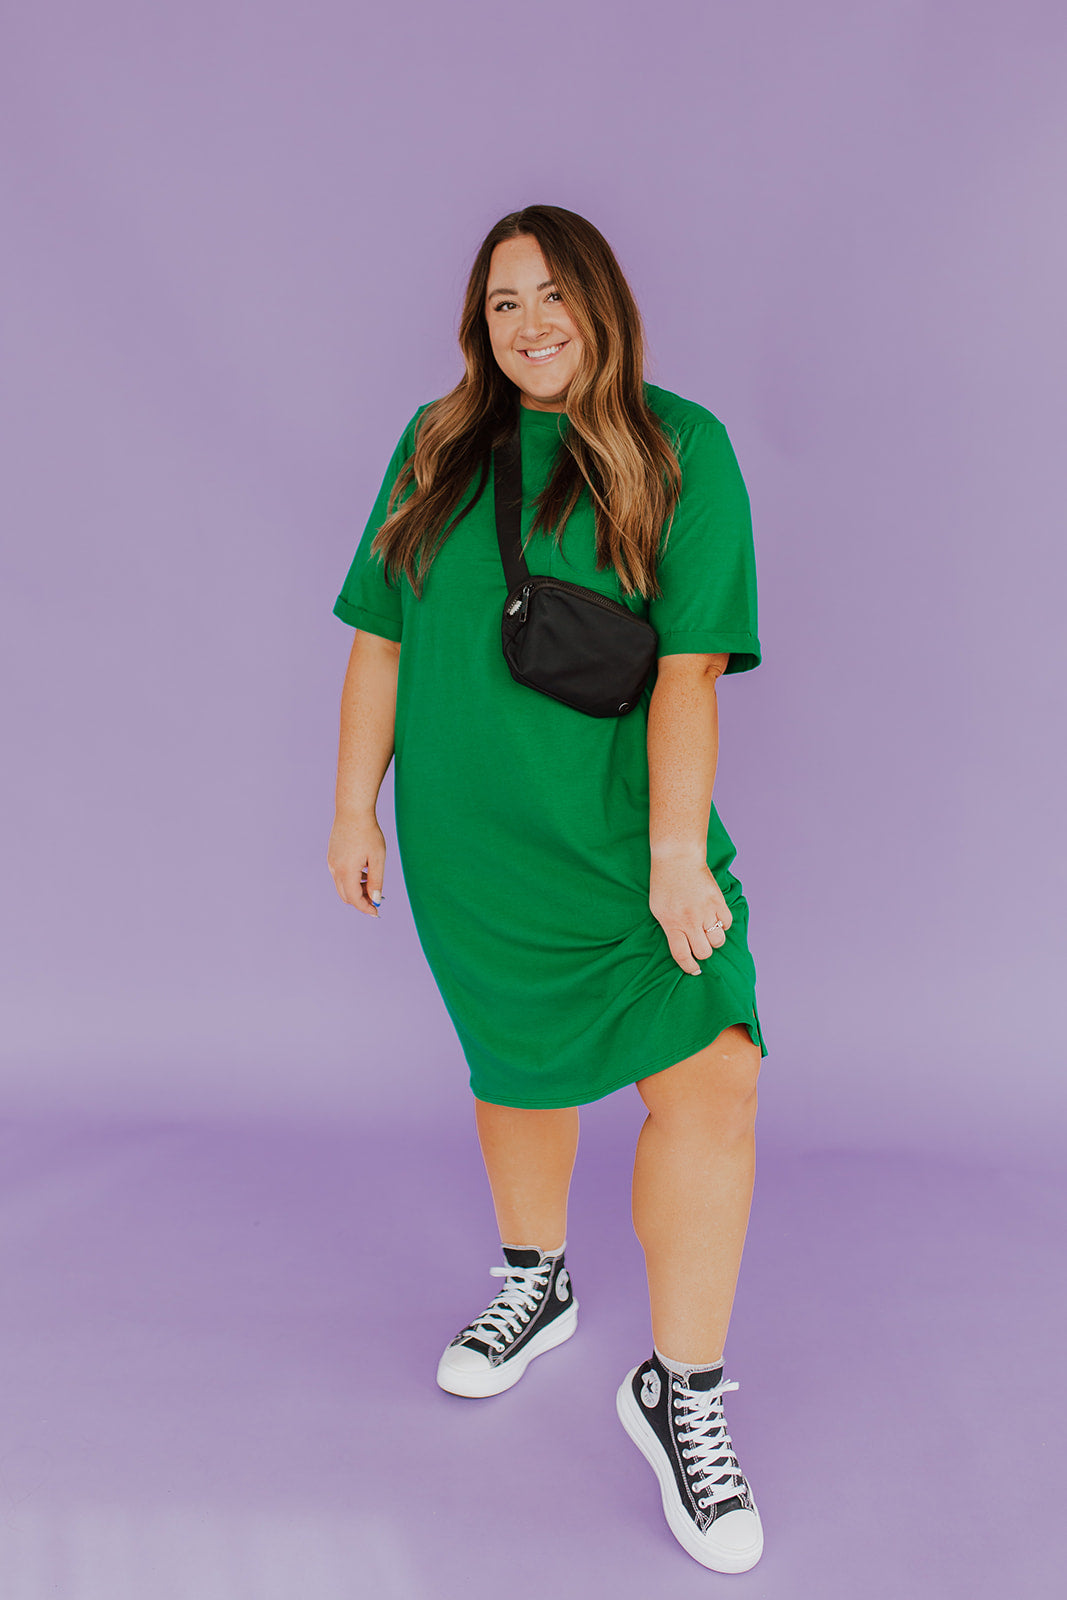 THE EASY DOES IT POCKET T-SHIRT DRESS BY PINK DESERT IN KELLY GREEN